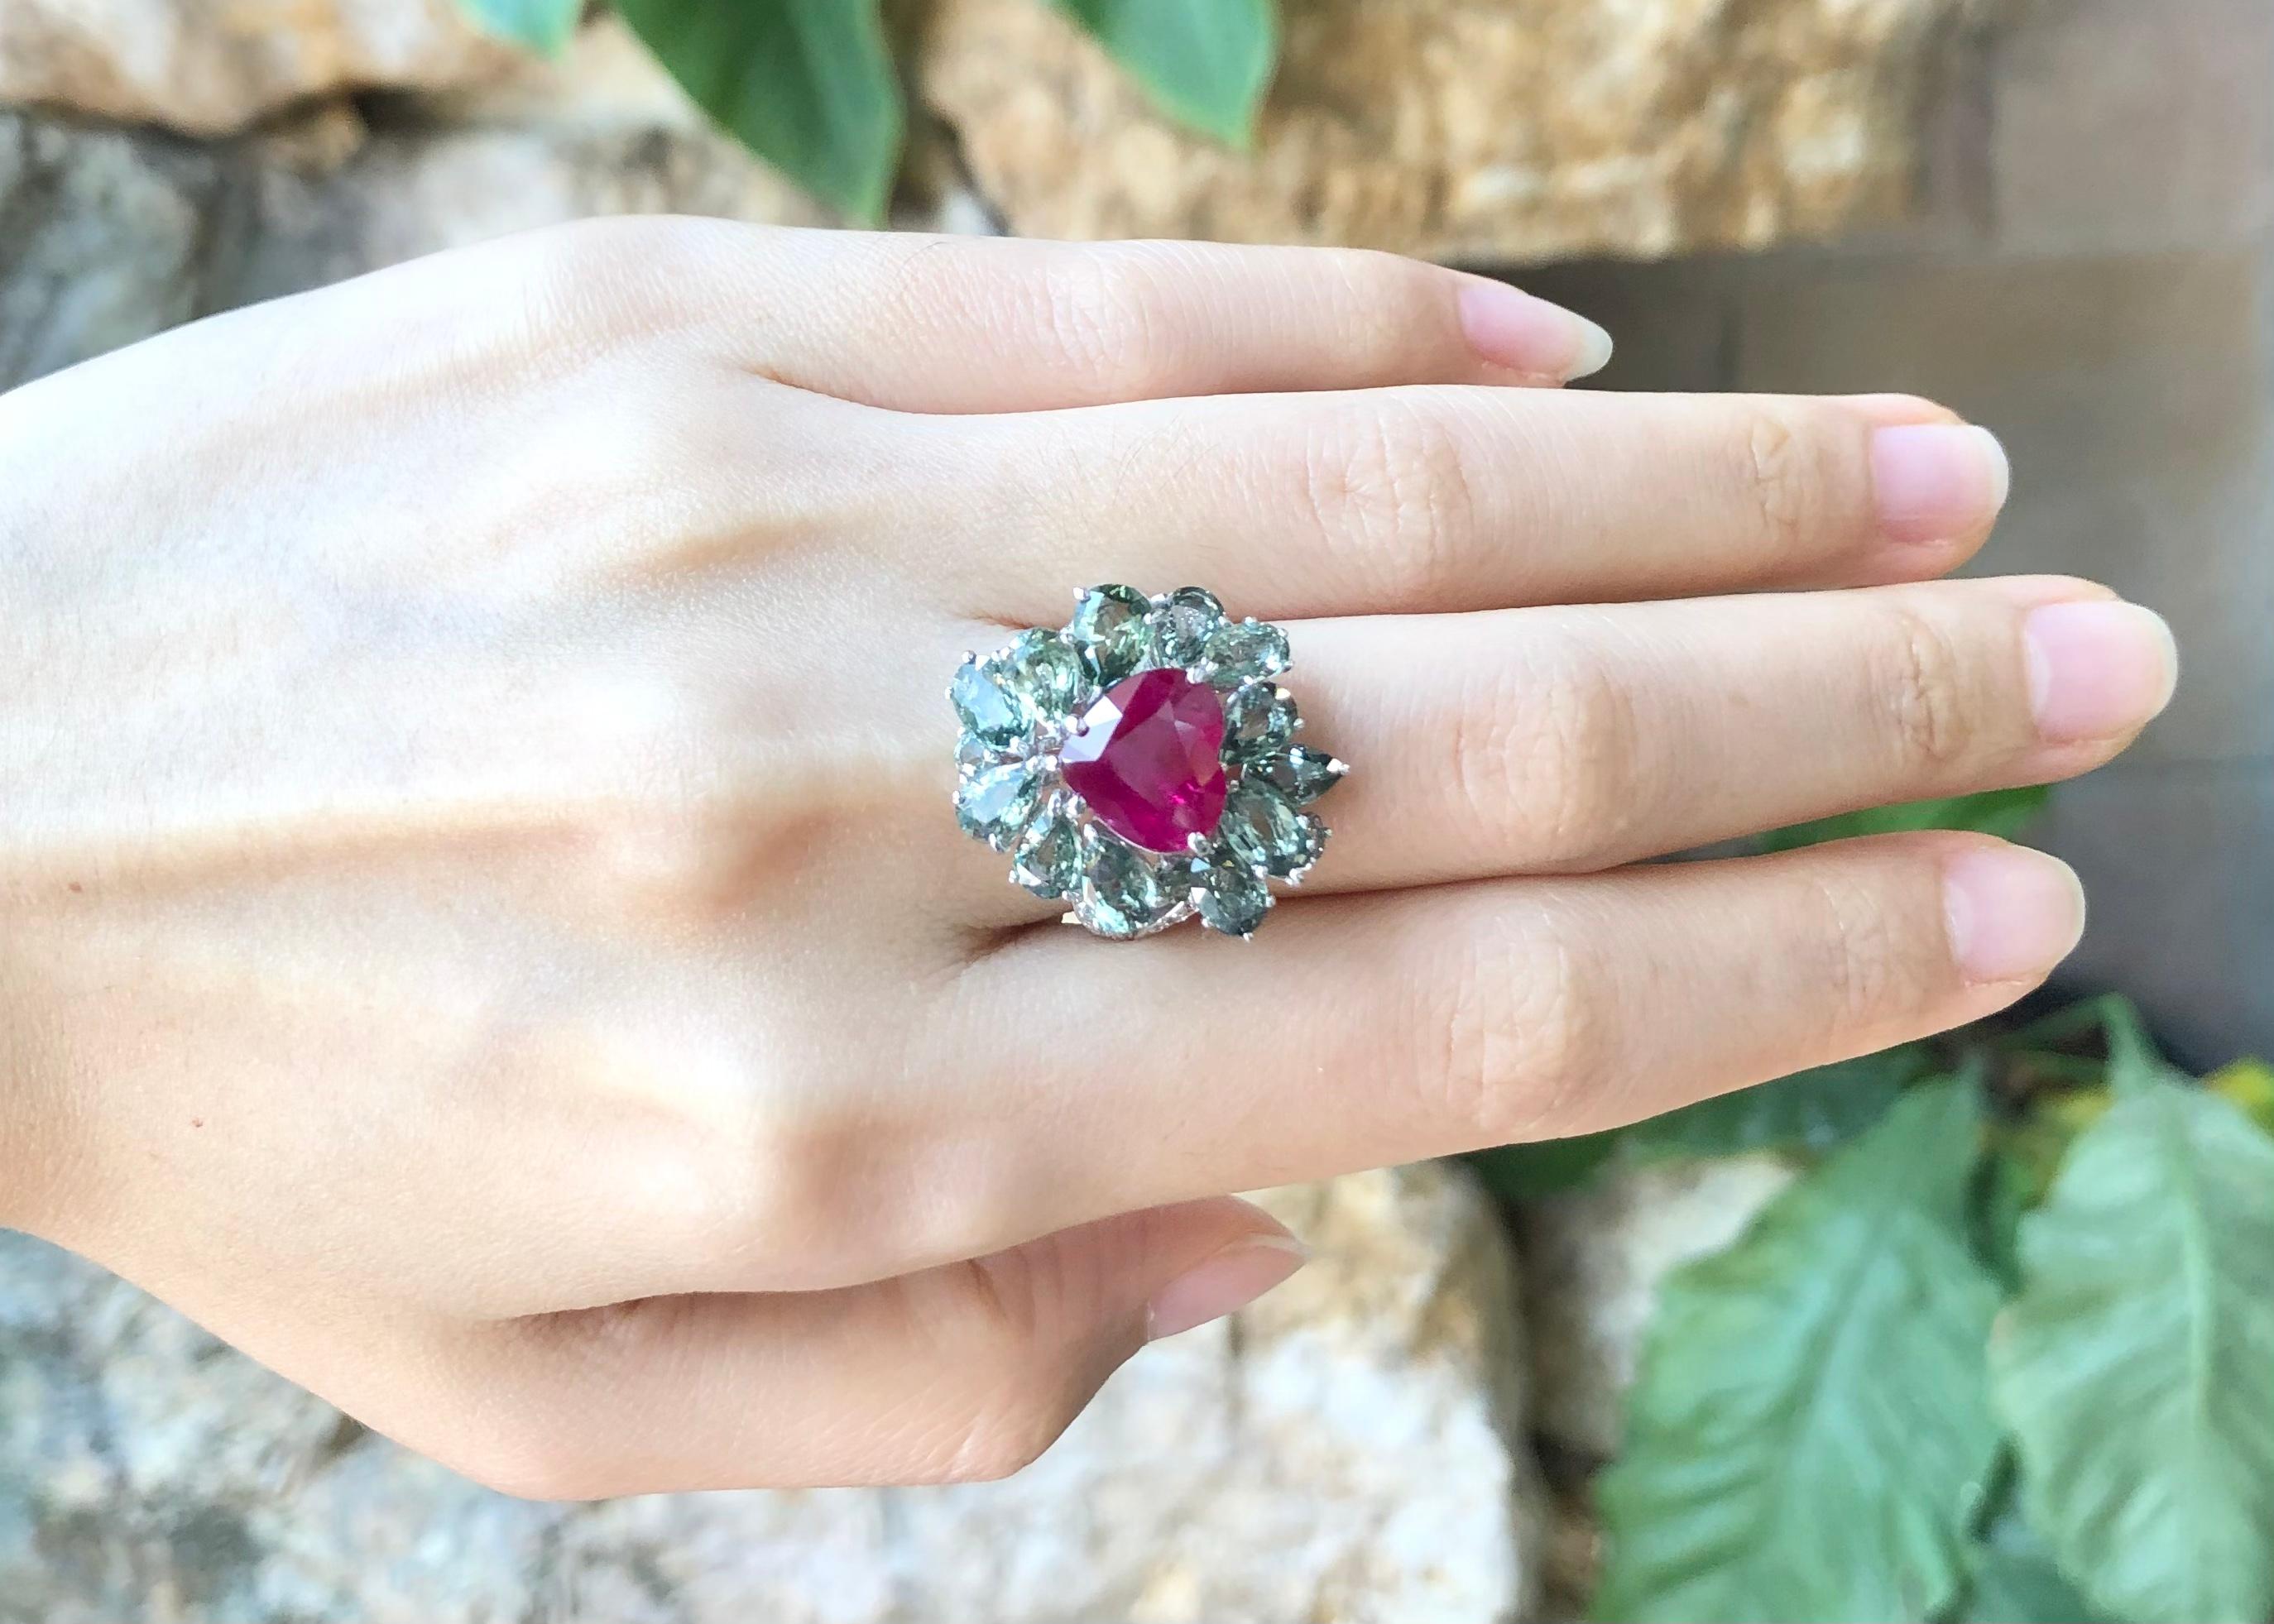 Ruby 4.35 carats, Green Sapphire 4.35 carats and Diamond 0.19 carat Ring set in 18 Karat White Gold Settings

Width:  2.0 cm 
Length: 2.4 cm
Ring Size: 51
Total Weight: 10.83grams



